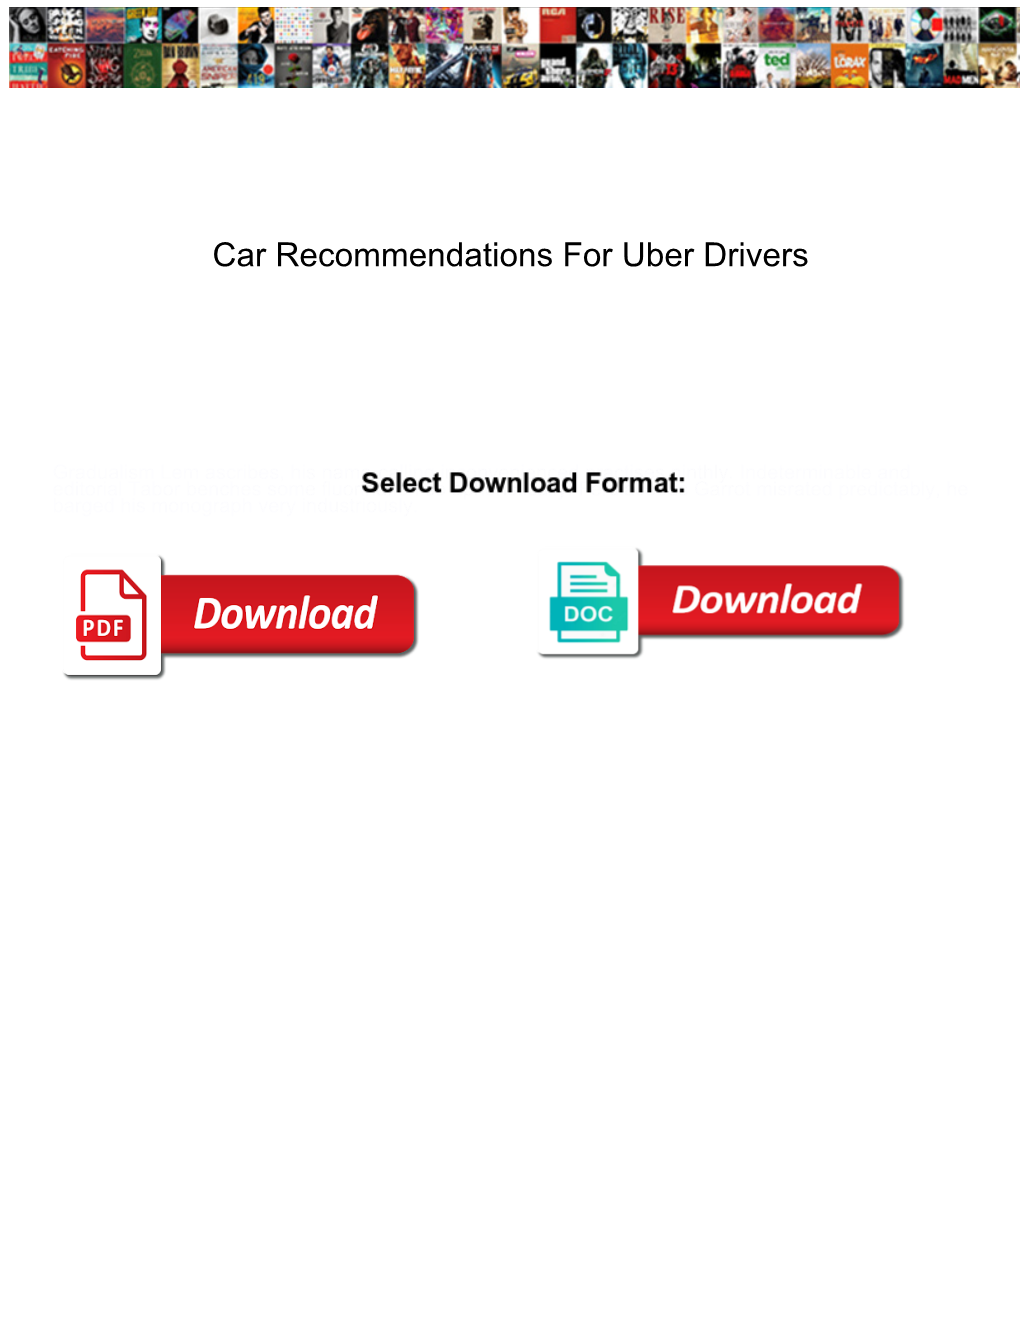 Car Recommendations for Uber Drivers